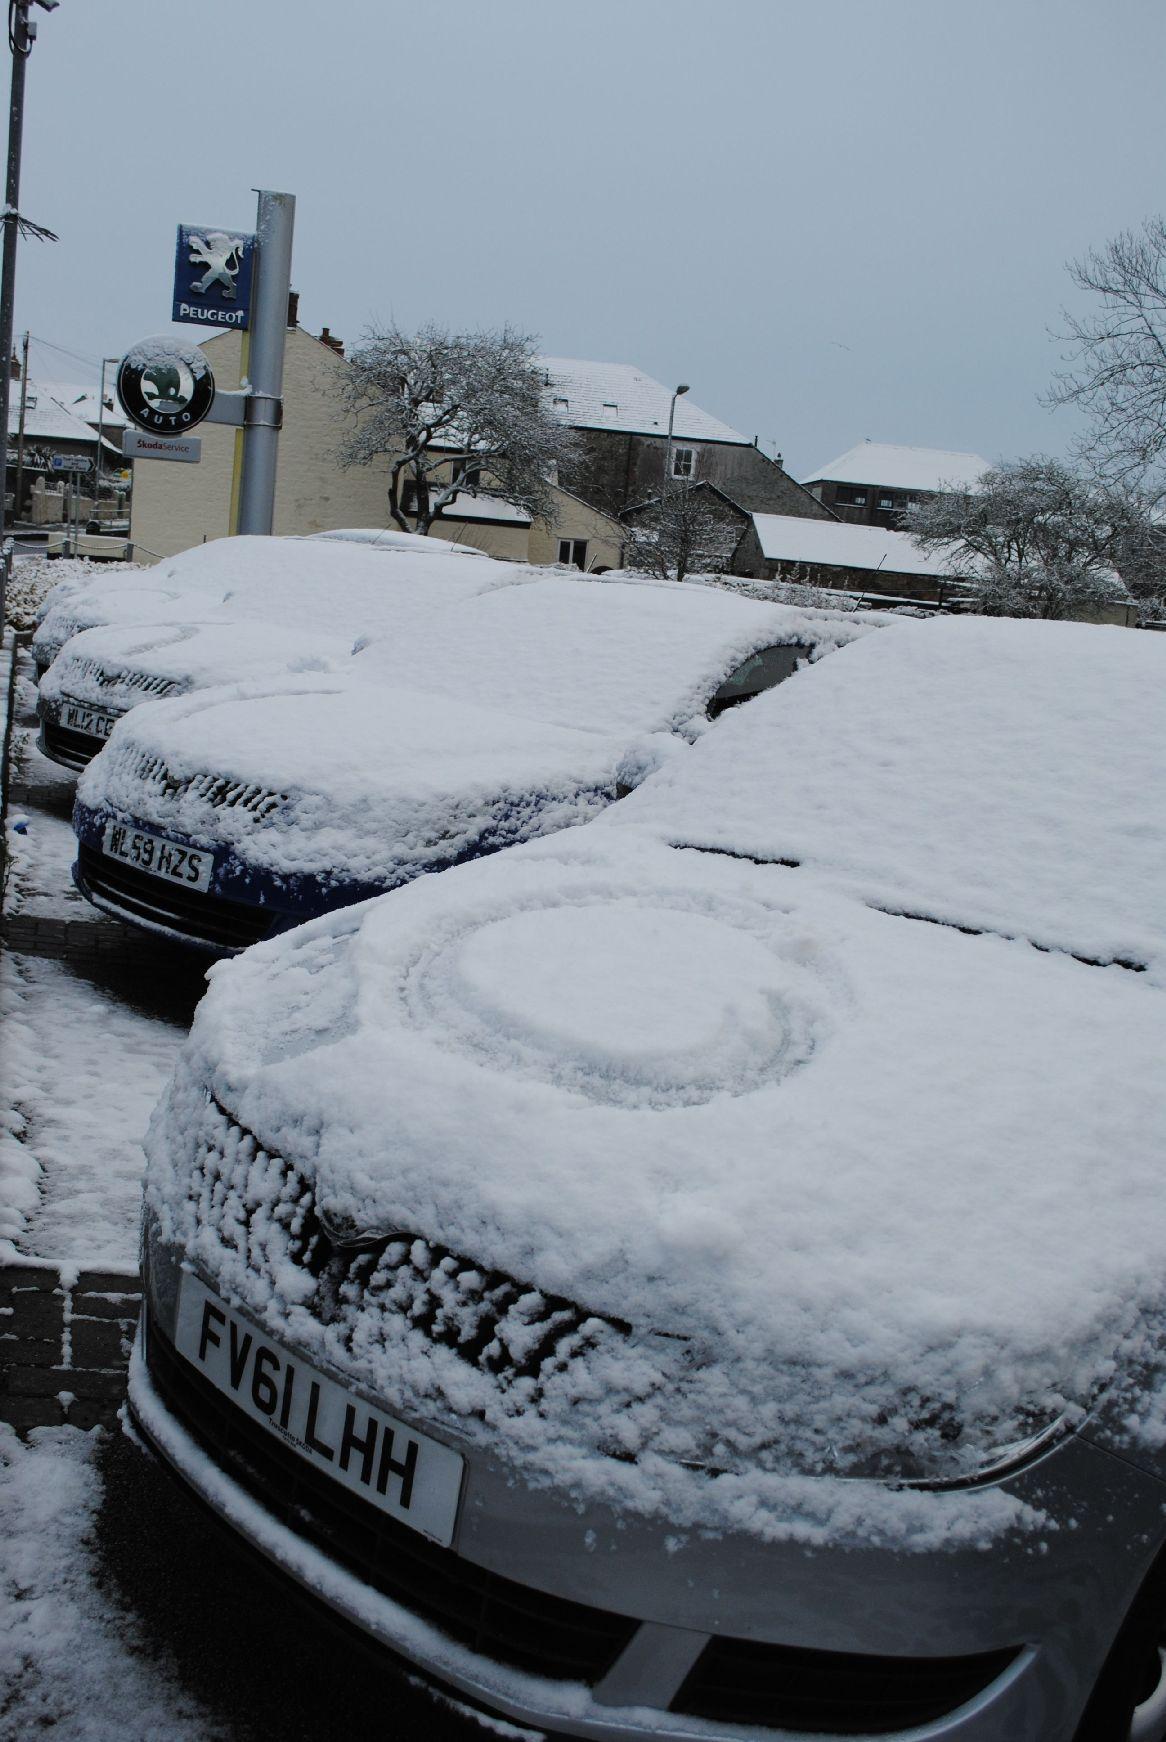 Cars for sale at Truscotts covered in the white stuff